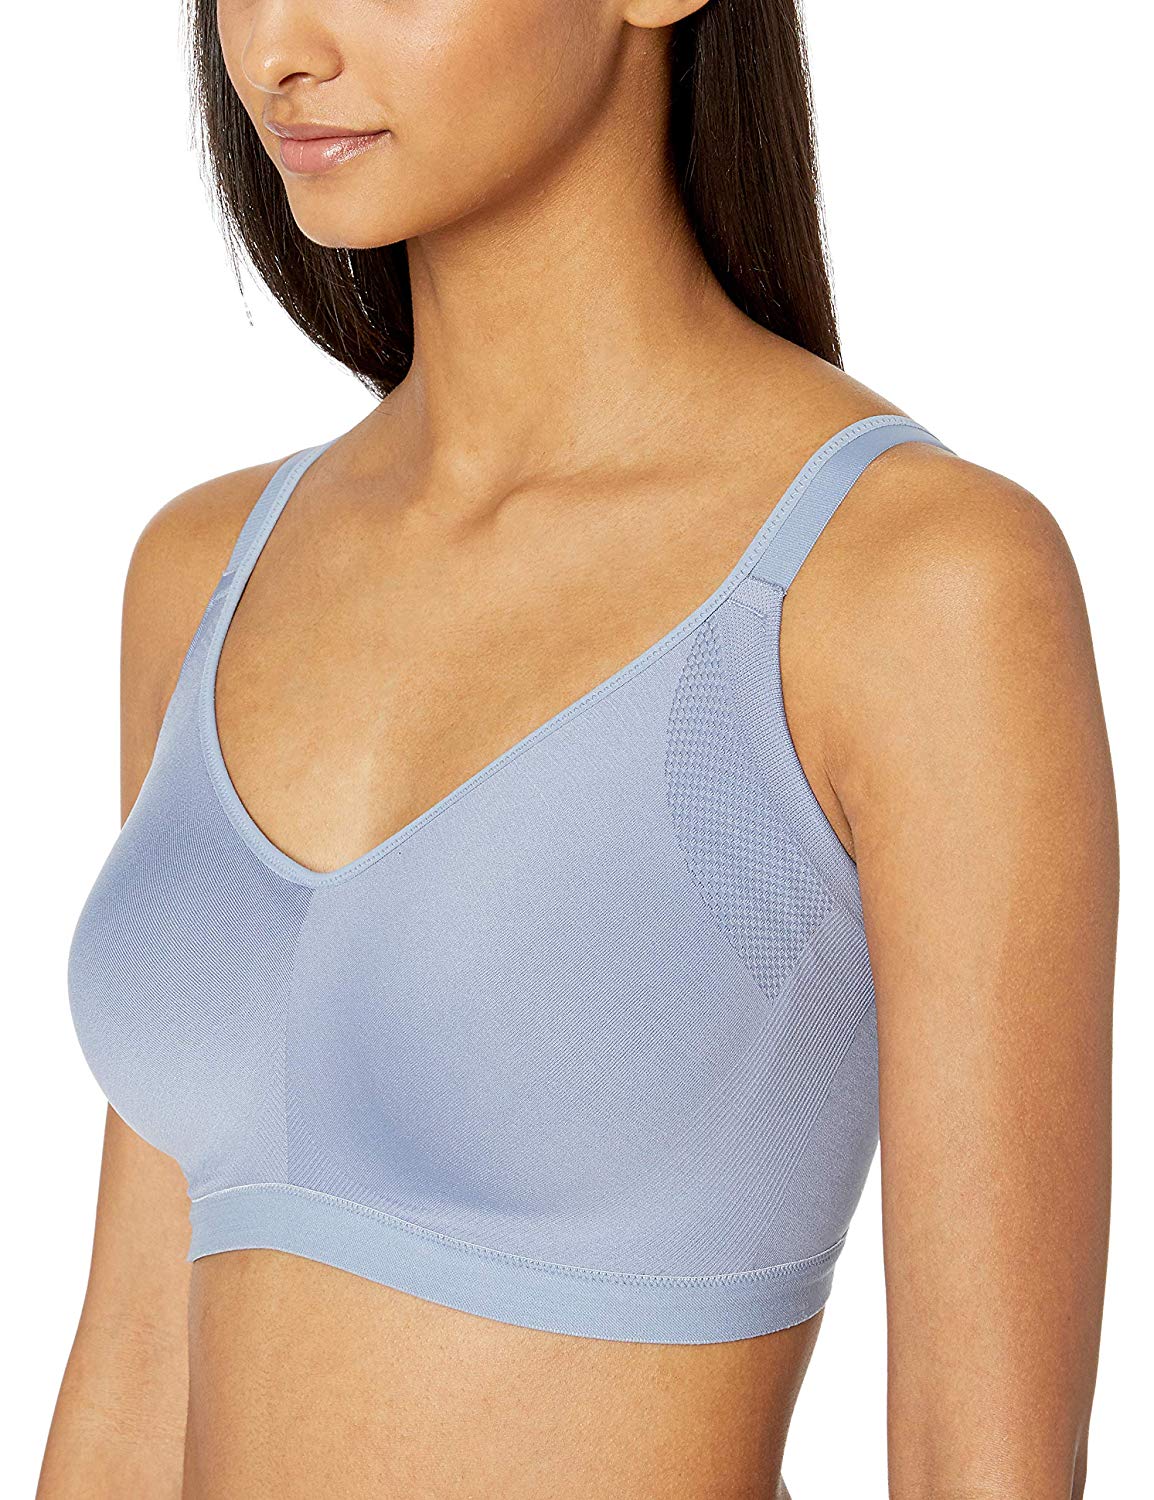 Warner S Women S Easy Does It No Bulge Wire Free Bra Toasted Blue Size Small EBay